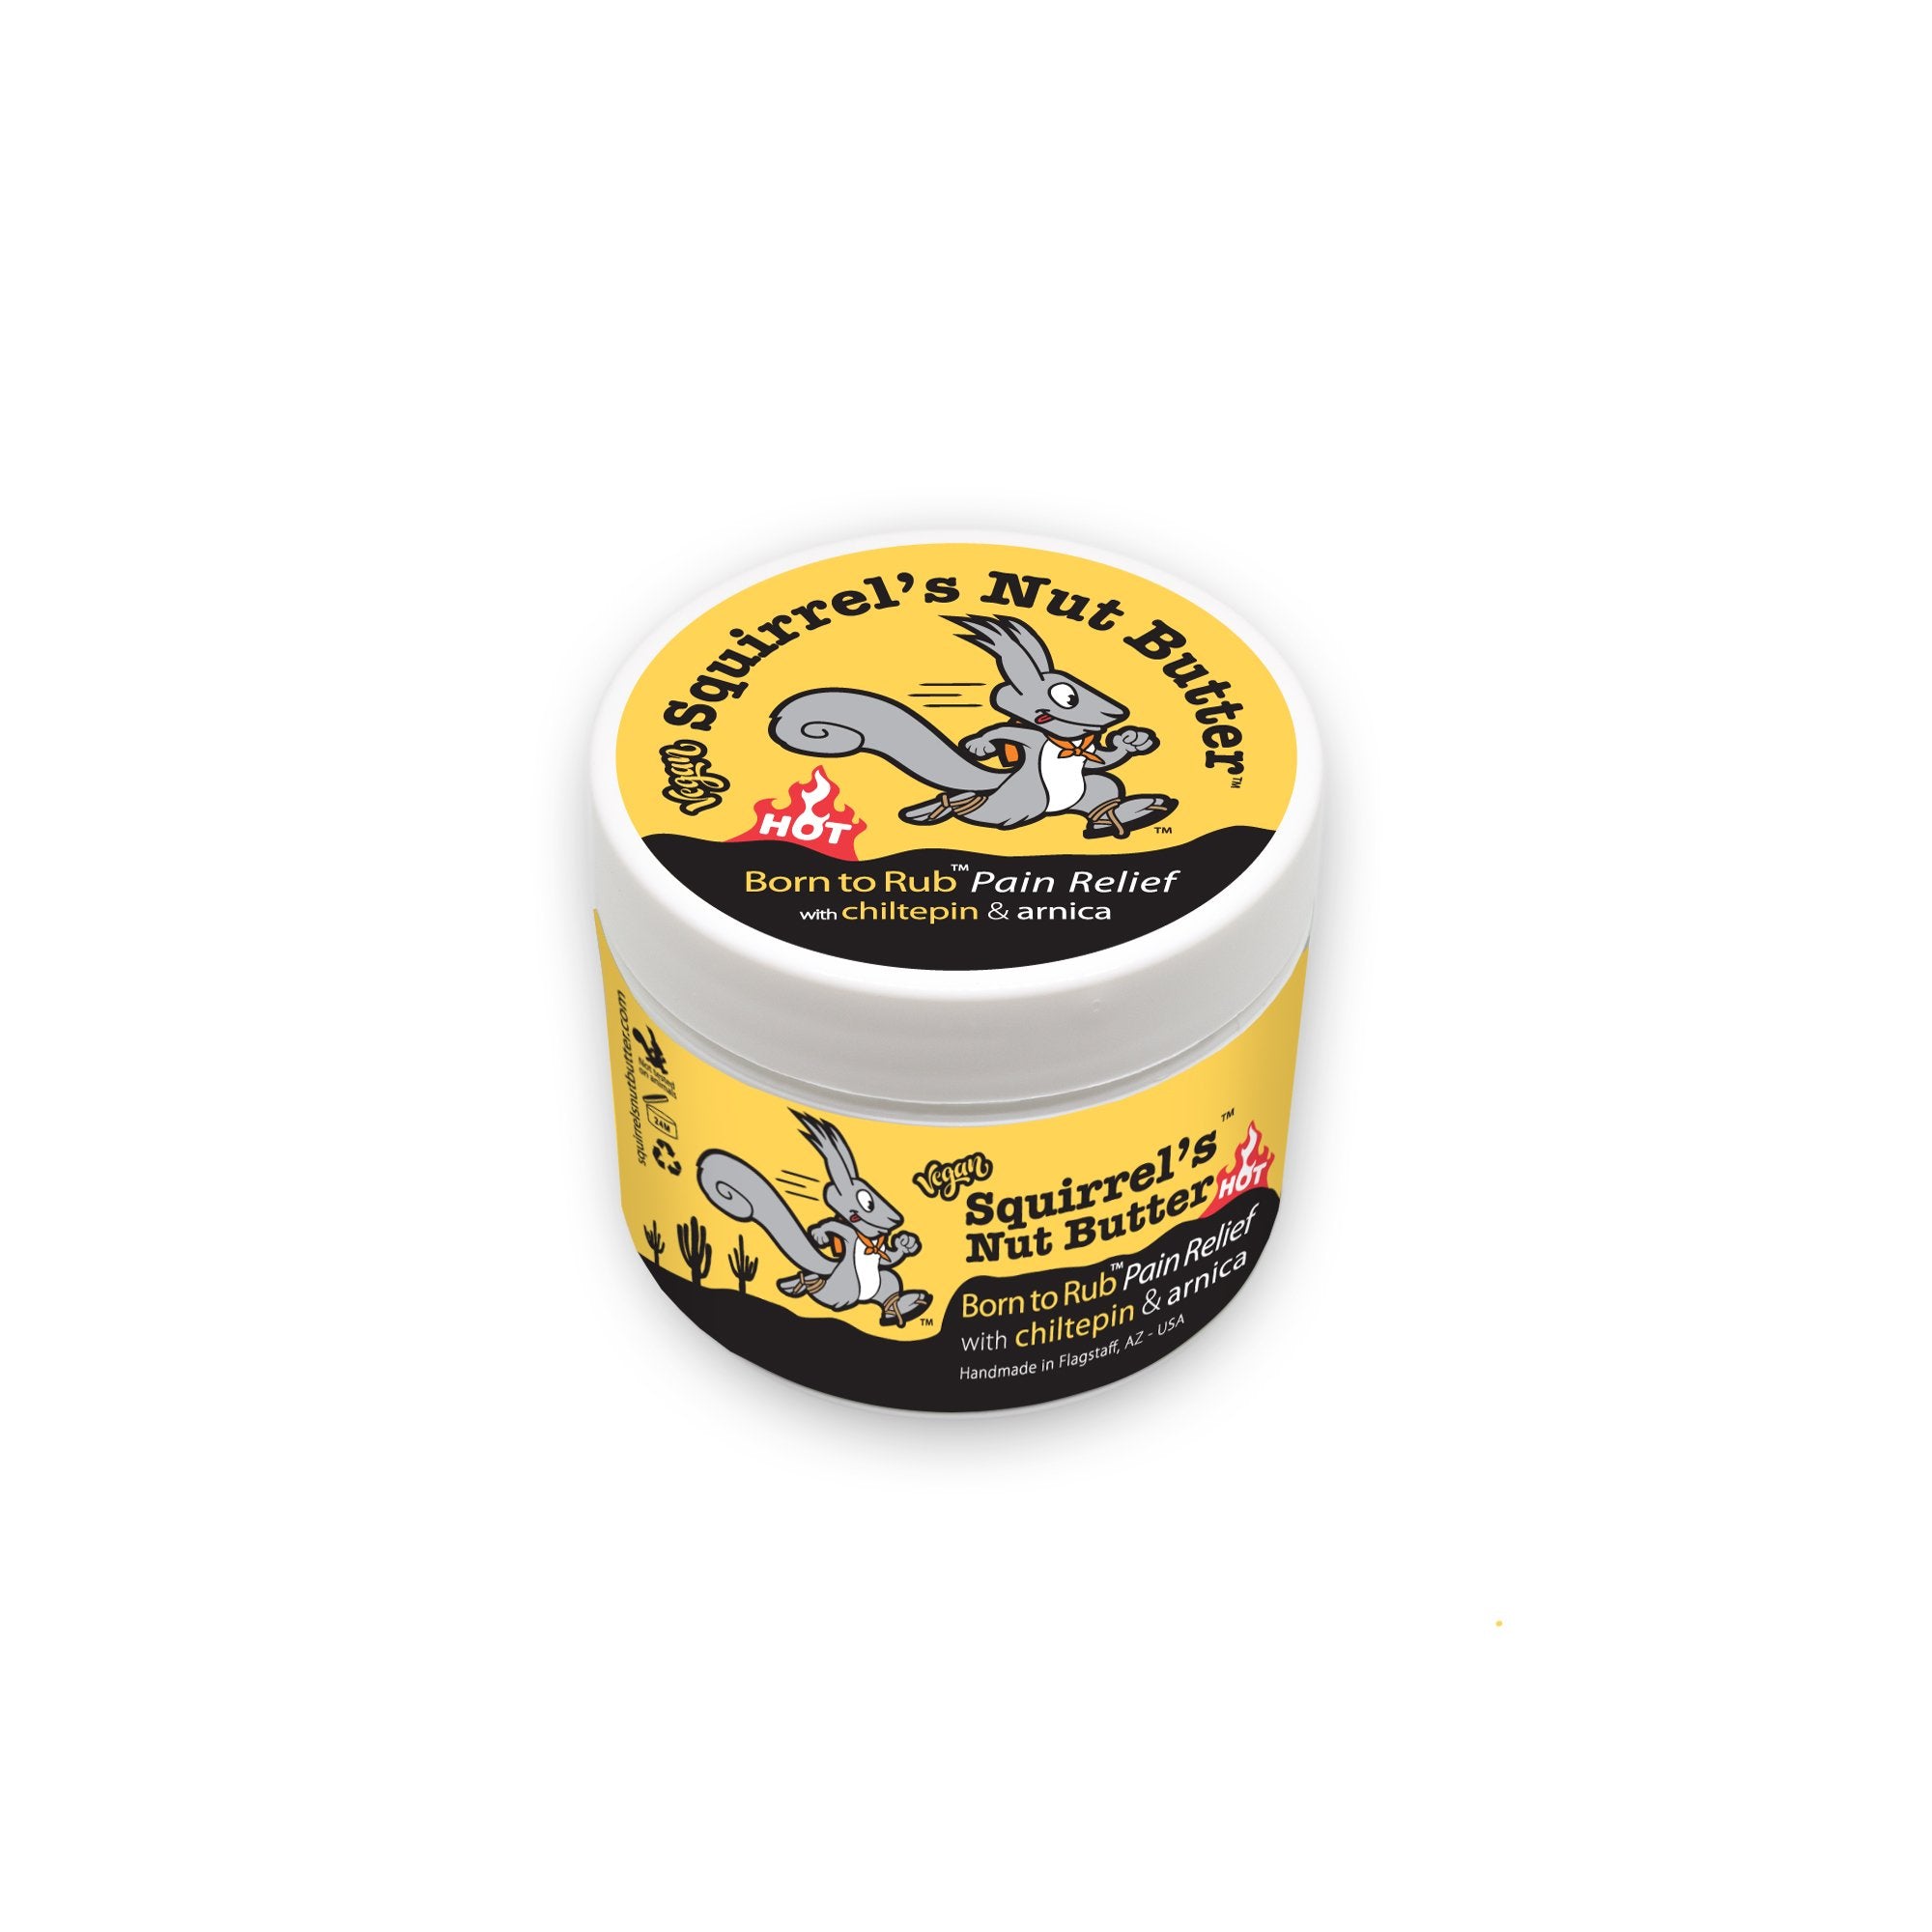 SQUIRREL'S NUT BUTTER Vegan Born to Rub Pain Relief Salve